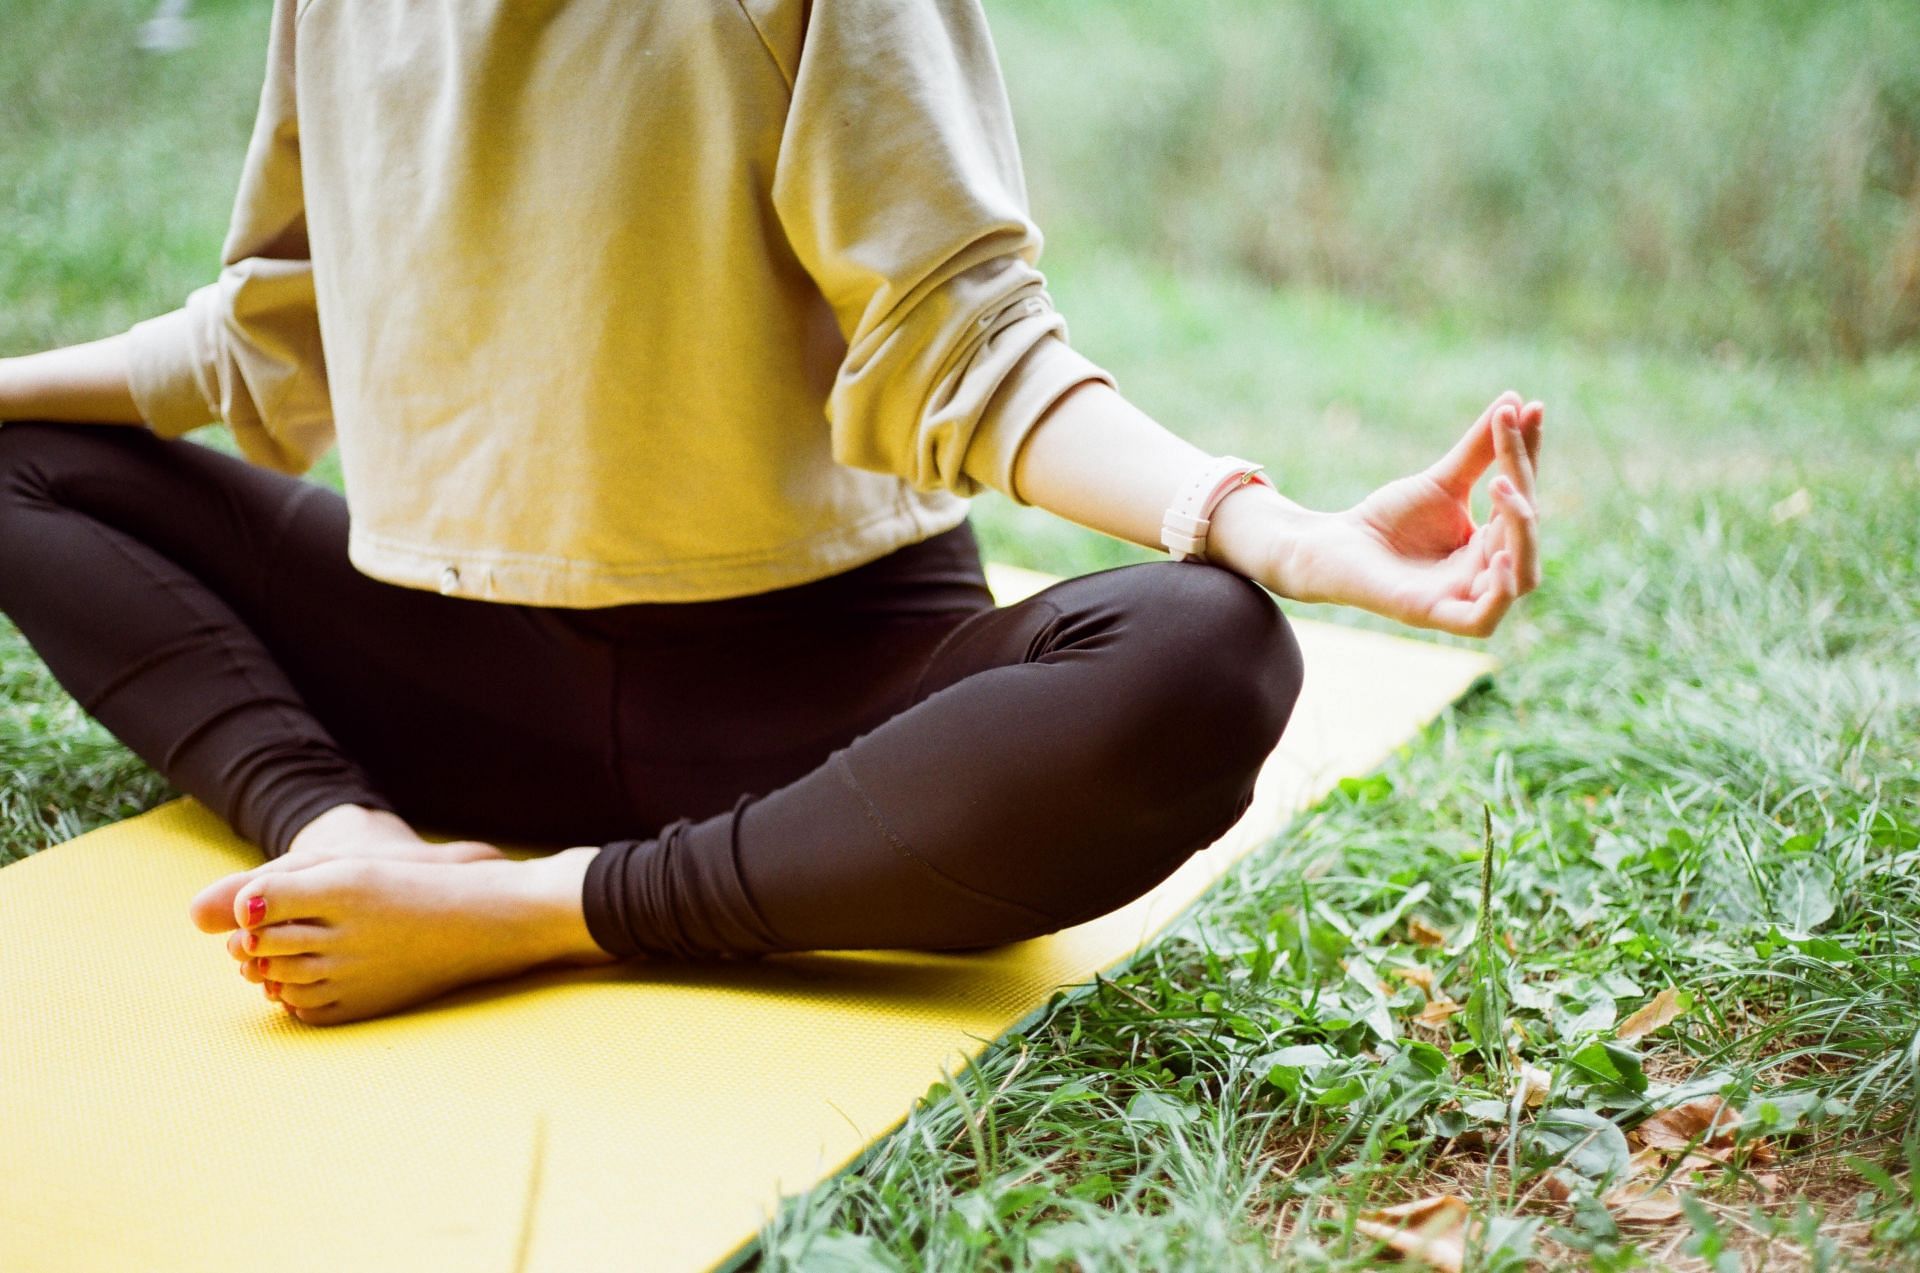 What are asanas? What is the best for meditation? - Quora